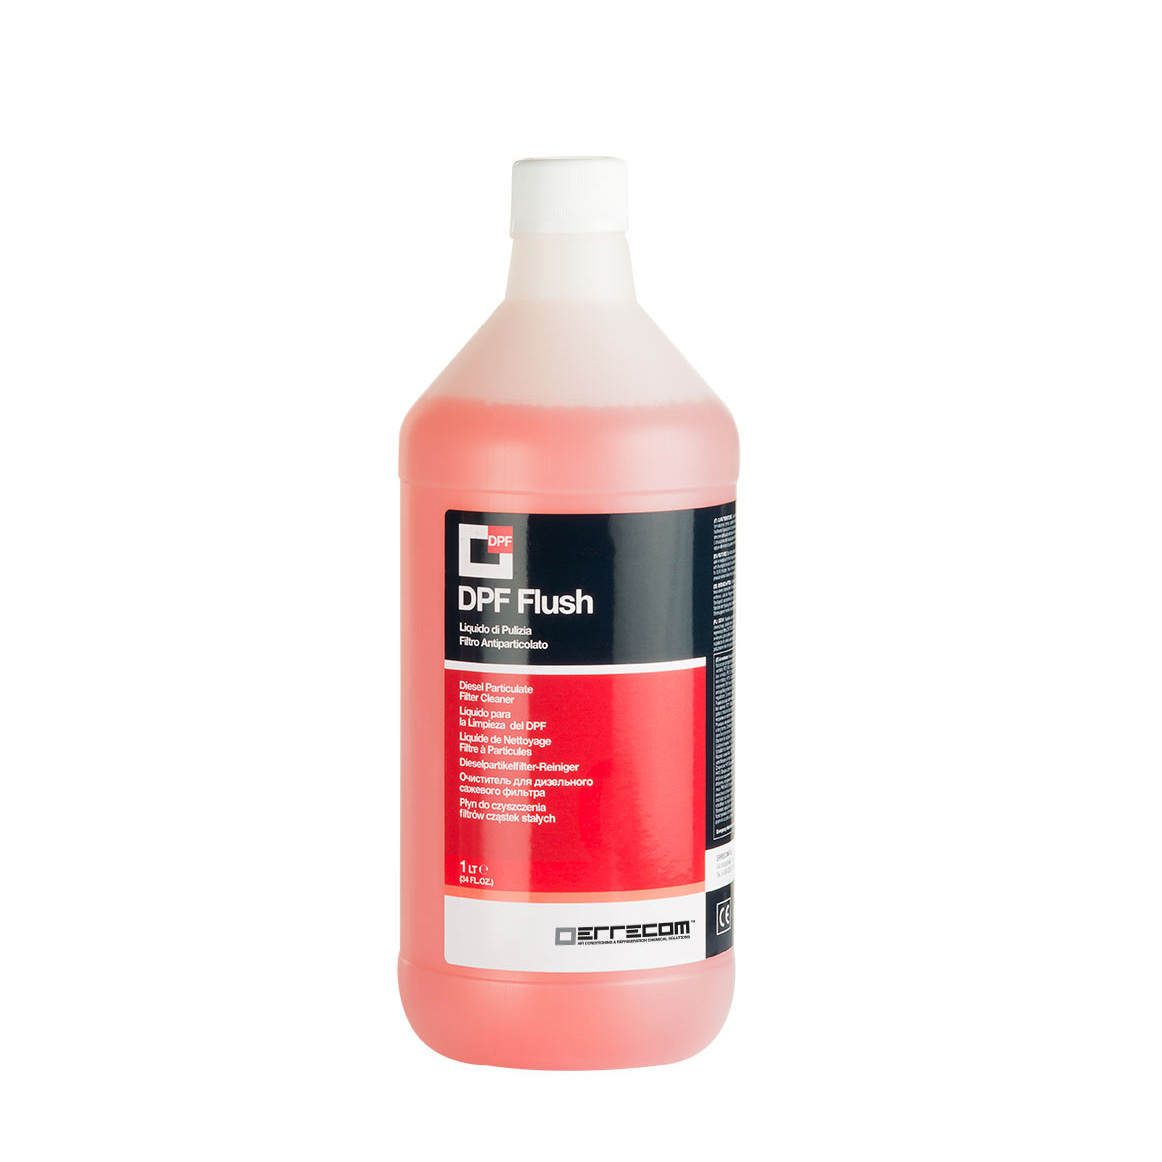 6 x DPF FLUSH - Liquid for the Cleaning of Diesel Particulate Filters - 1 liter - Package # 6 pcs.